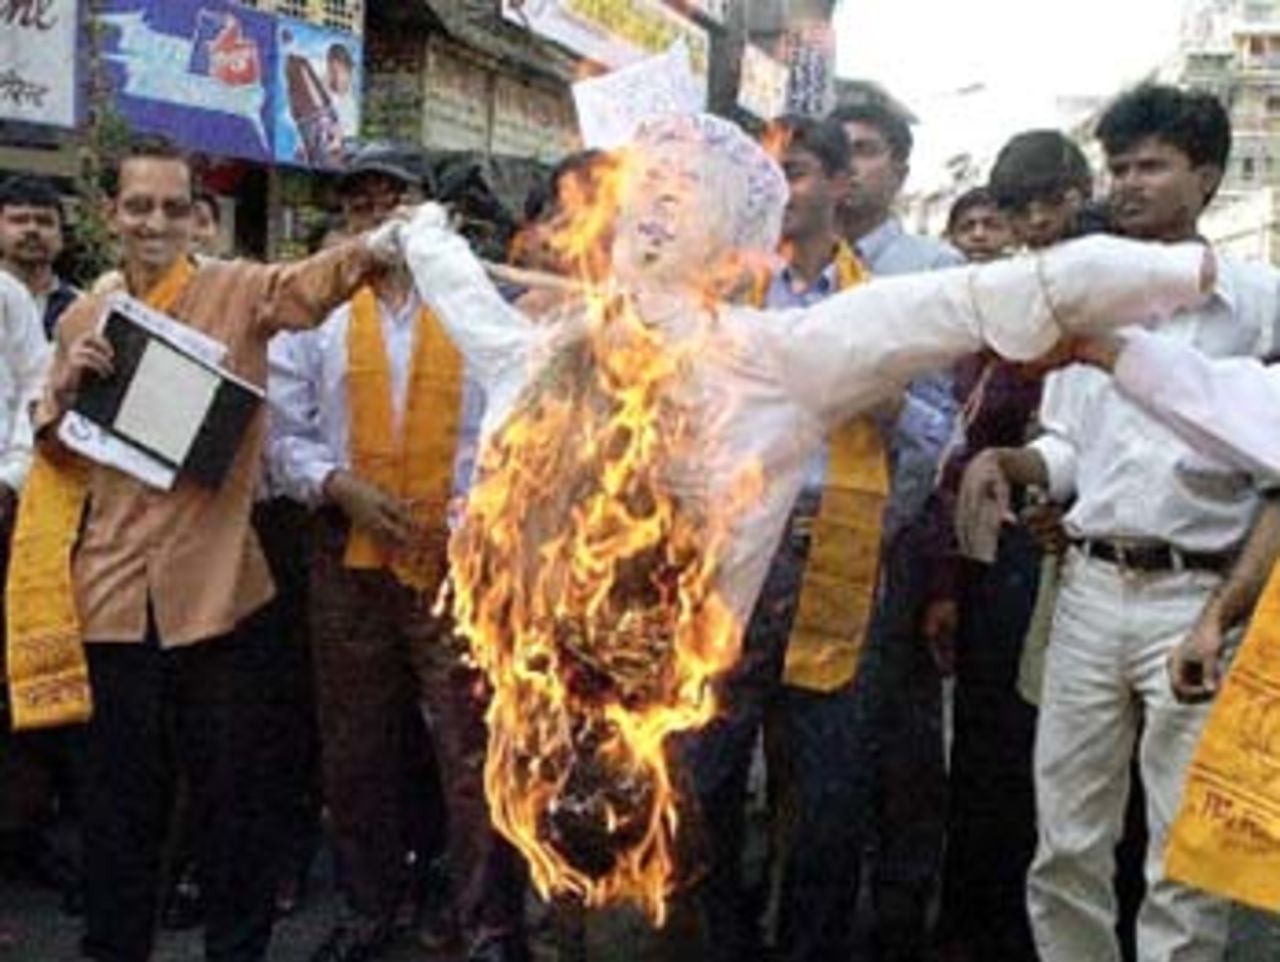 Bharatiya Janata Party activists burn an effigy of former Indian cricket captain Mohammed Azharuddin during a demonstration 02 November 2000 in Bombay. India's Central Bureau of Investigation (CBI), in a report submitted to the Indian Sports Minister, has named Azharuddin along with other top international cricket players as being involved in match-fixing for cash, November 4, 2000